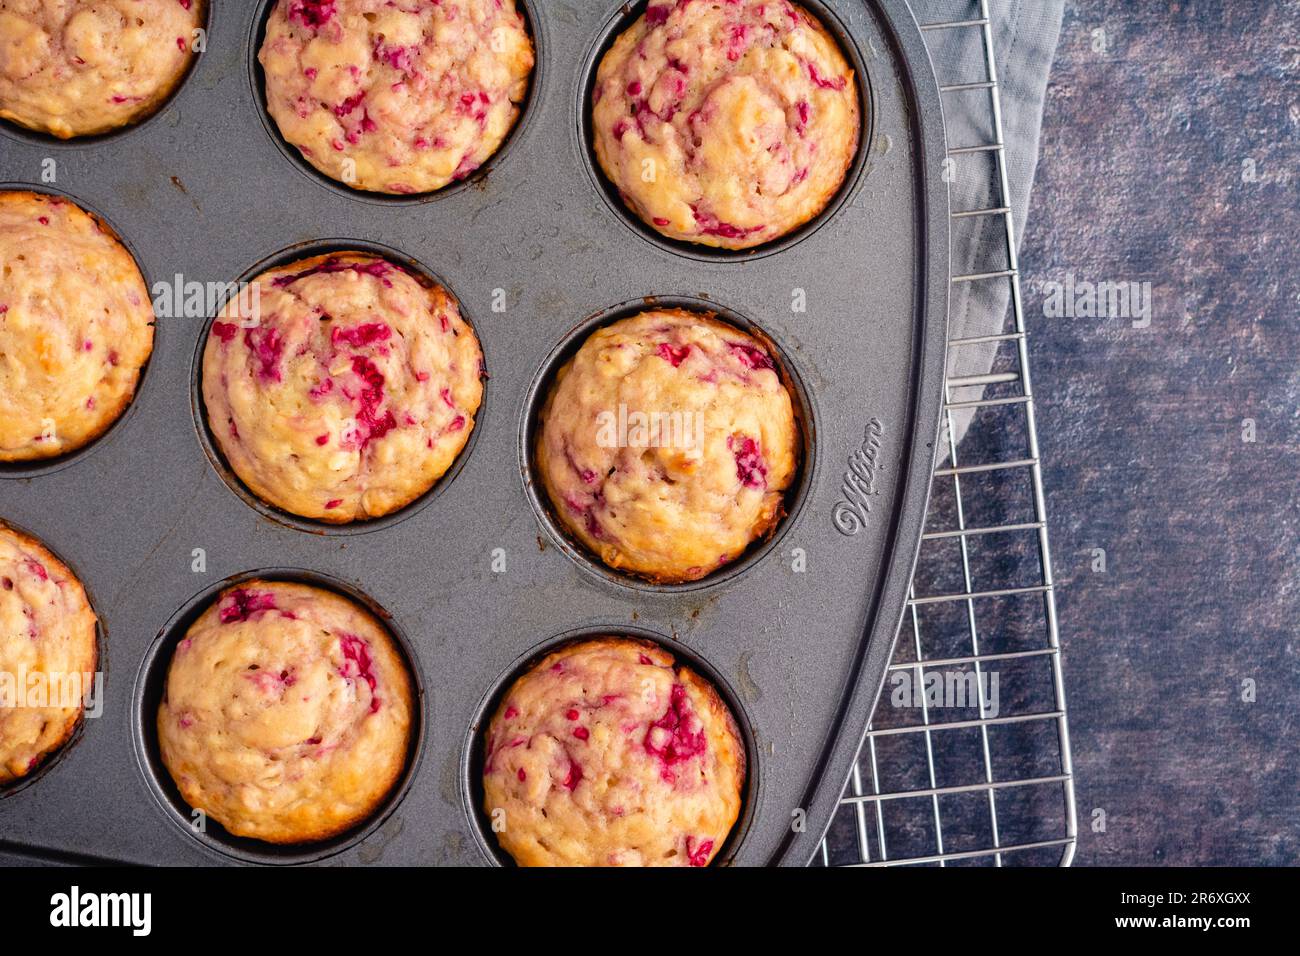 Freshly Baked Raspberry Muffins in a Nonstick Muffin Pan: Breakfast or dessert muffins made with fruit viewed from directly above in muffin tin Stock Photo